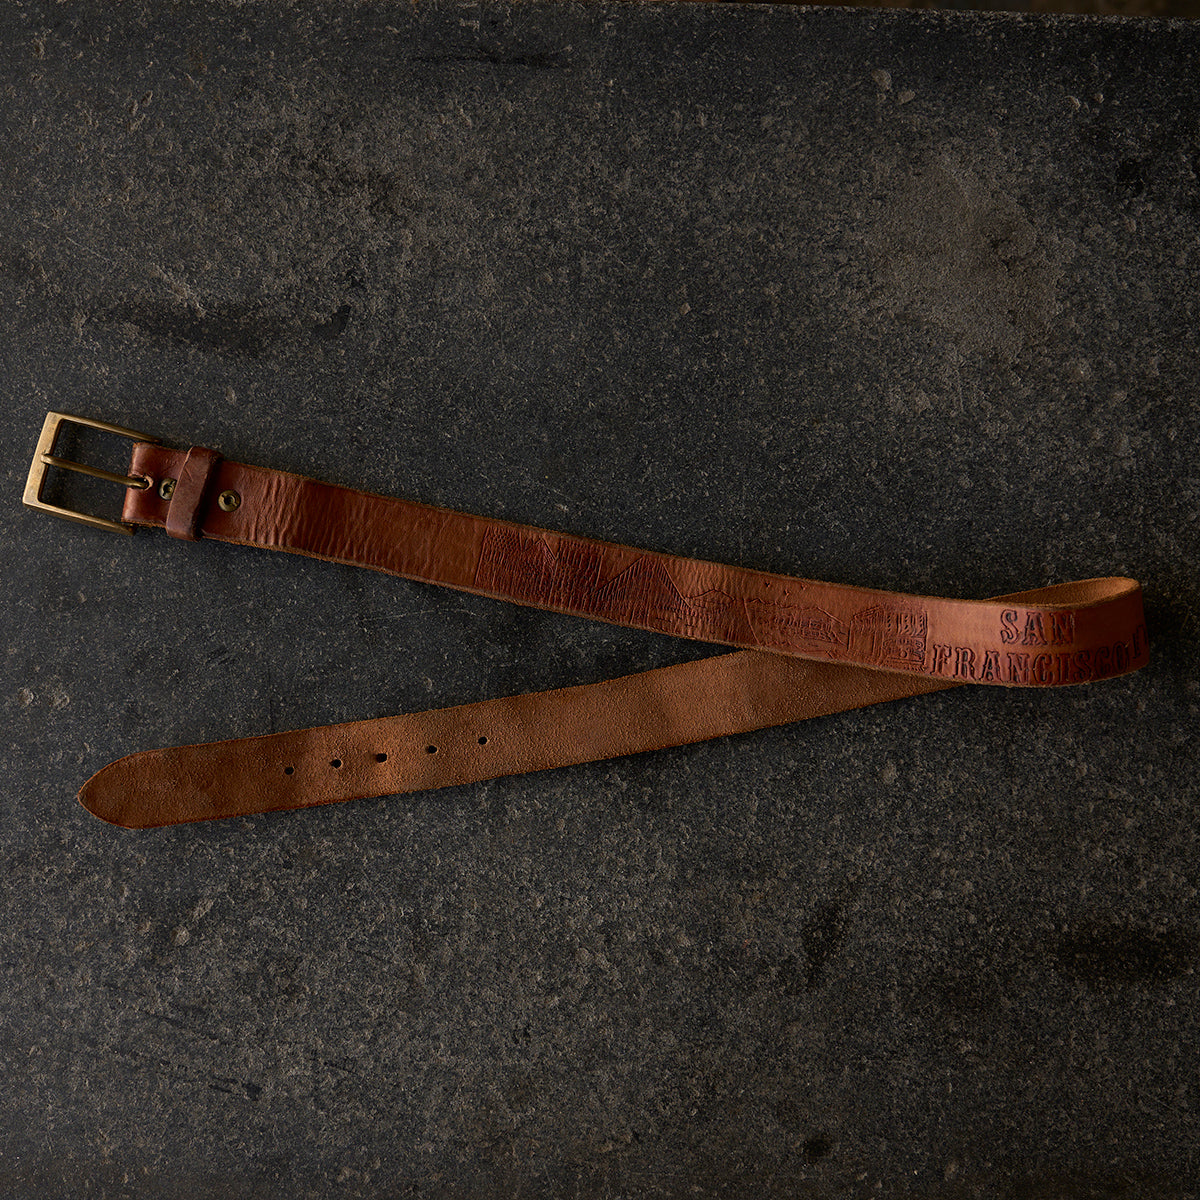 Vintage Distressed Black Brown Leather Belt 100% Real Leather Full Grain  Veg Tan Aged With Antique Silver or Brass Buckle 